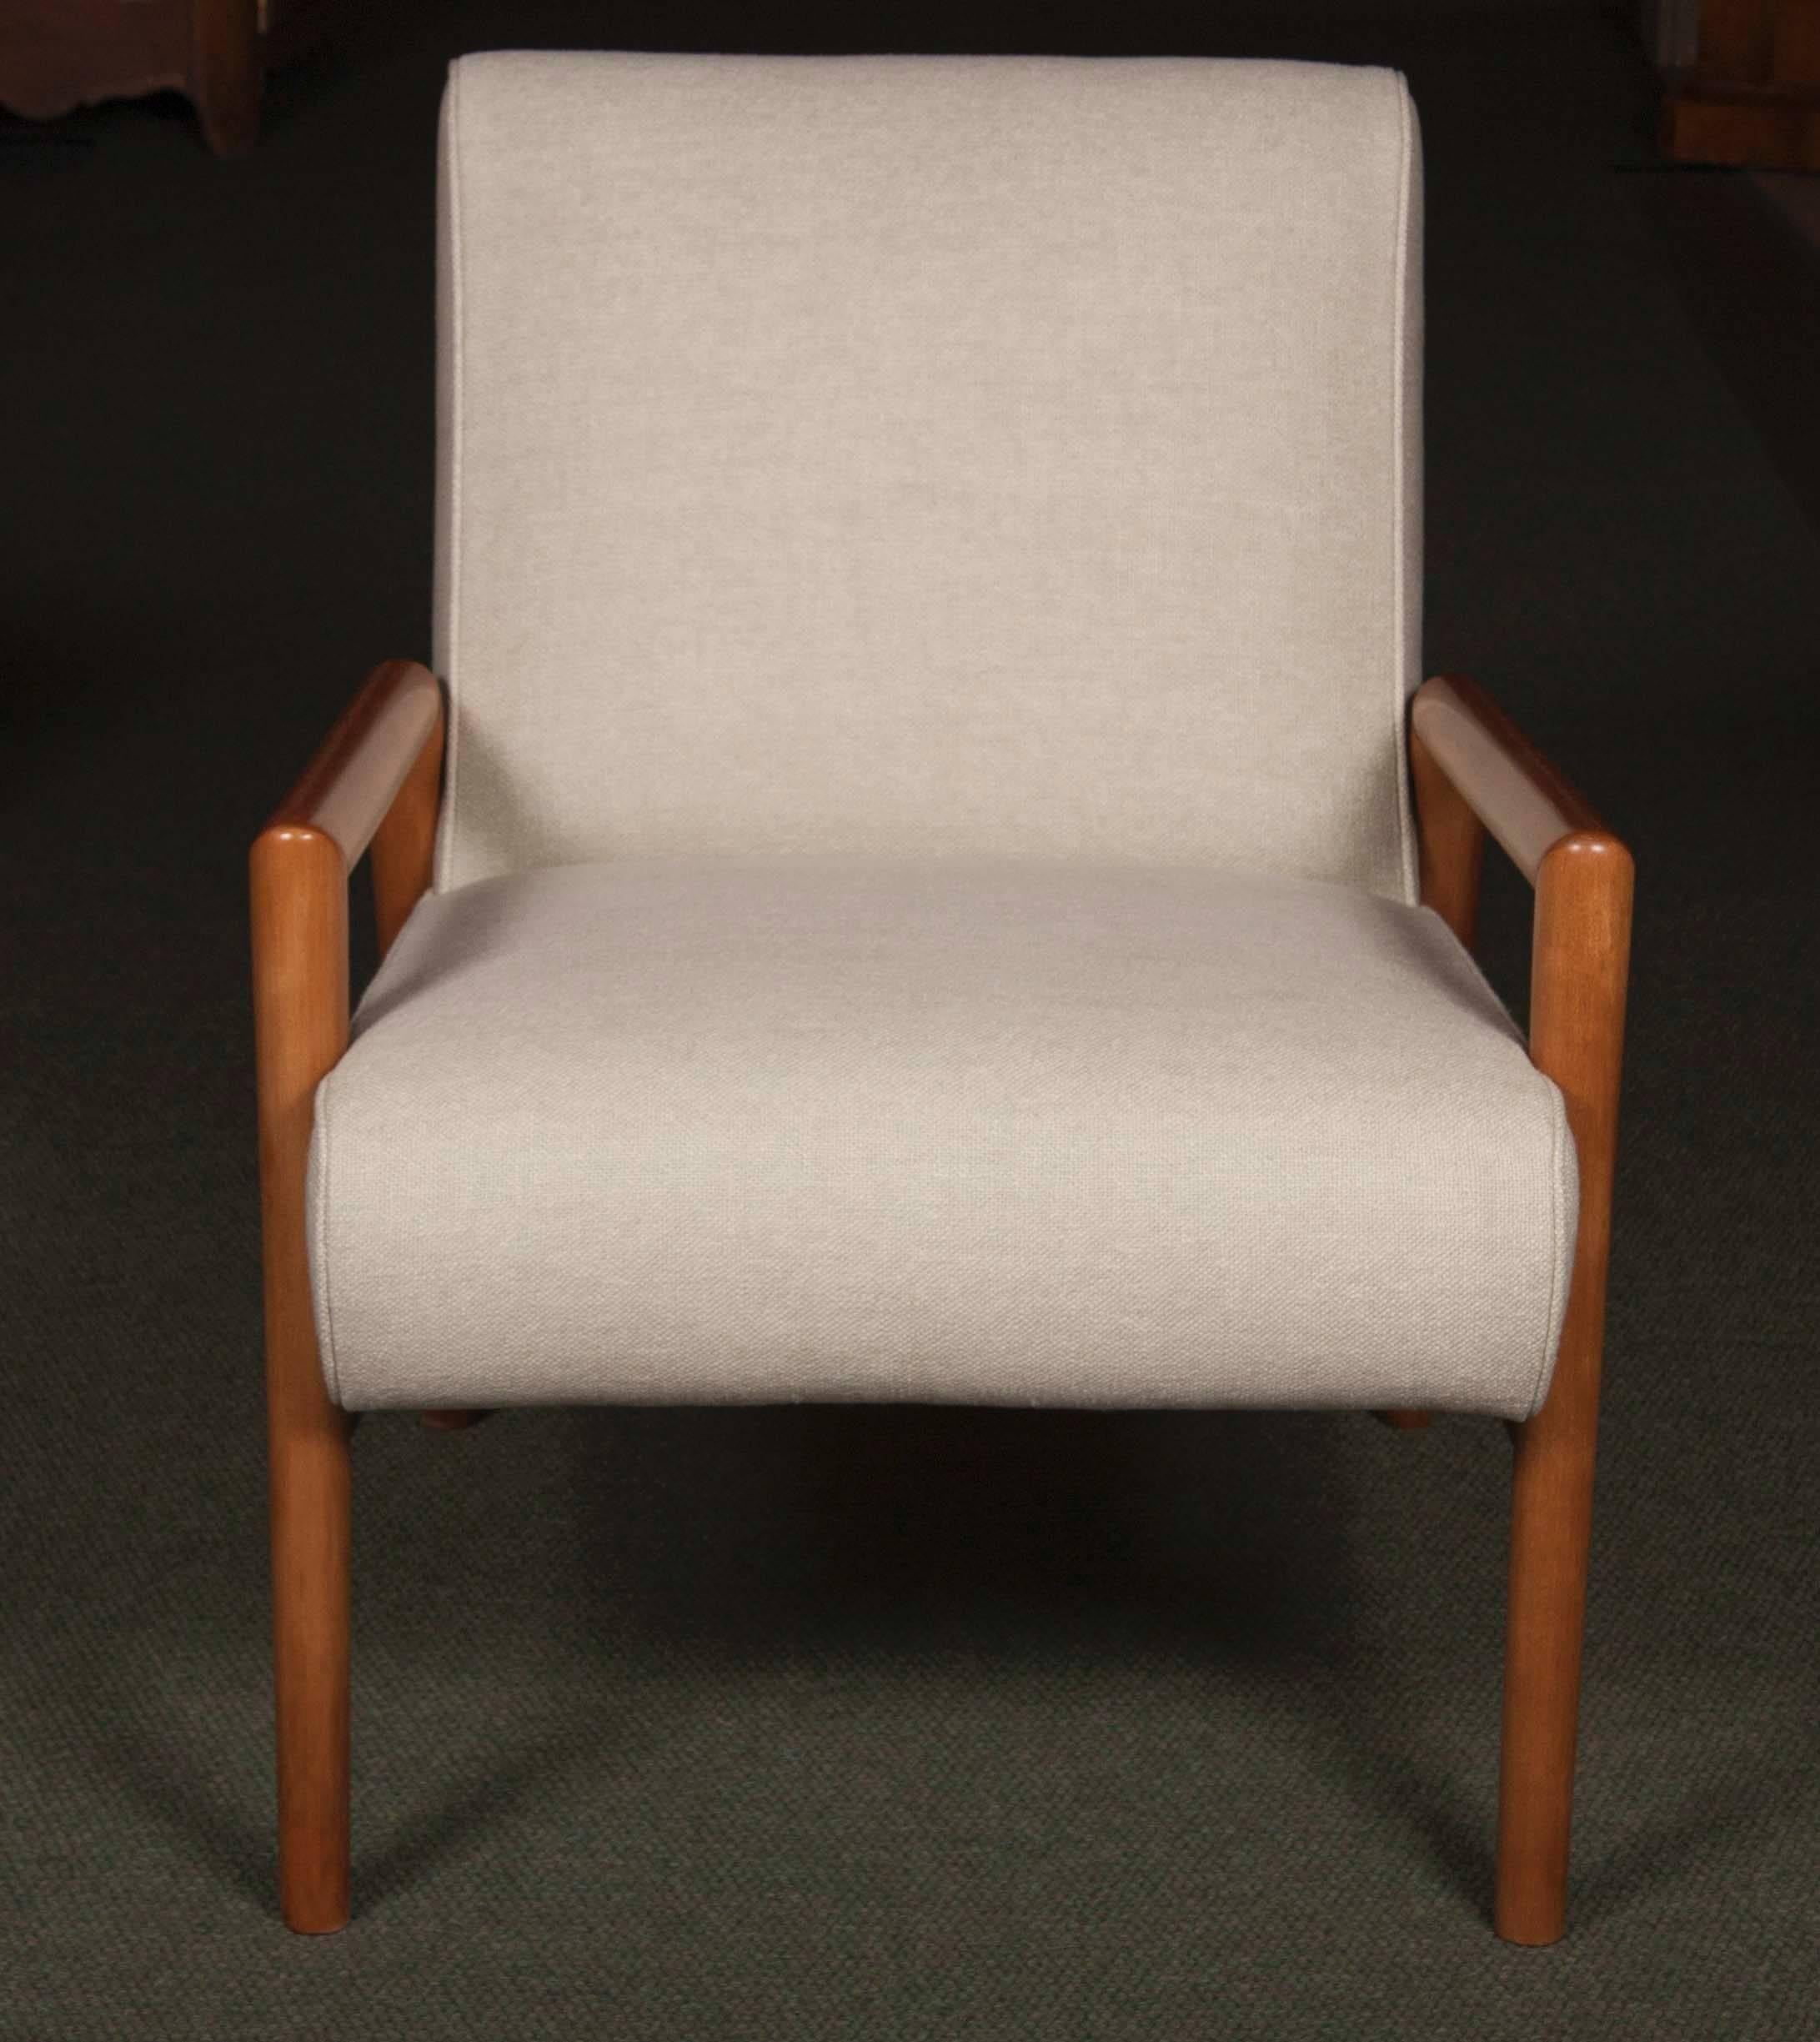 A Mid-Century bleached Mahogany open armchair designed by Leslie Diamond for Connant and Ball. Pair Available, upholstered and priced individually.